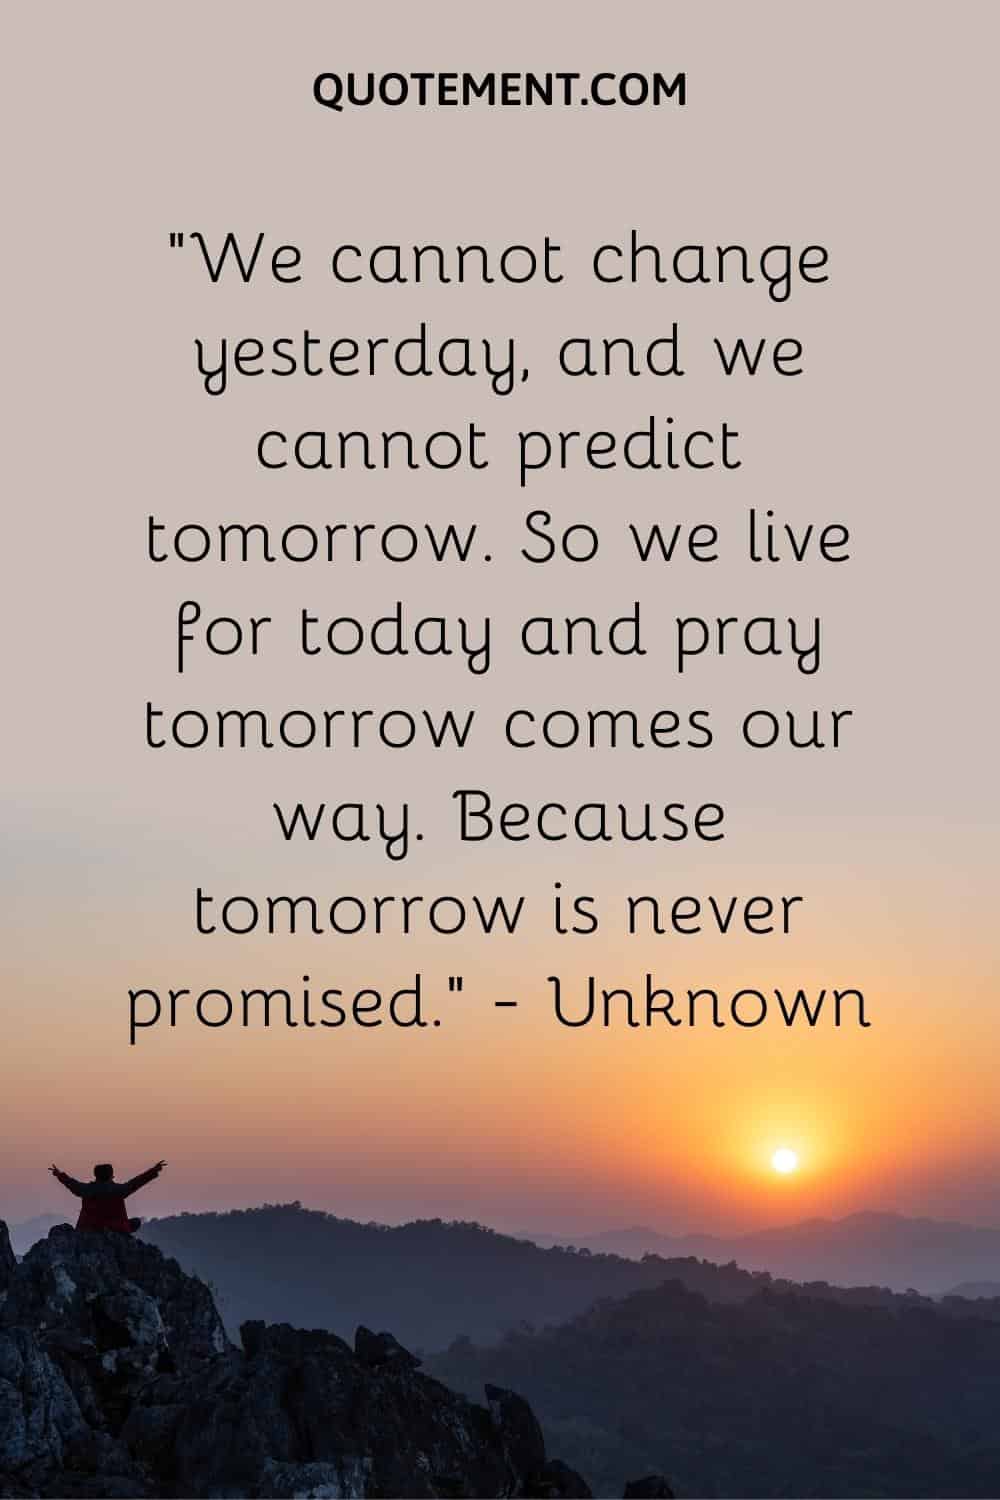 We cannot change yesterday, and we cannot predict tomorrow. so we live for today and pray tomorrow comes our way